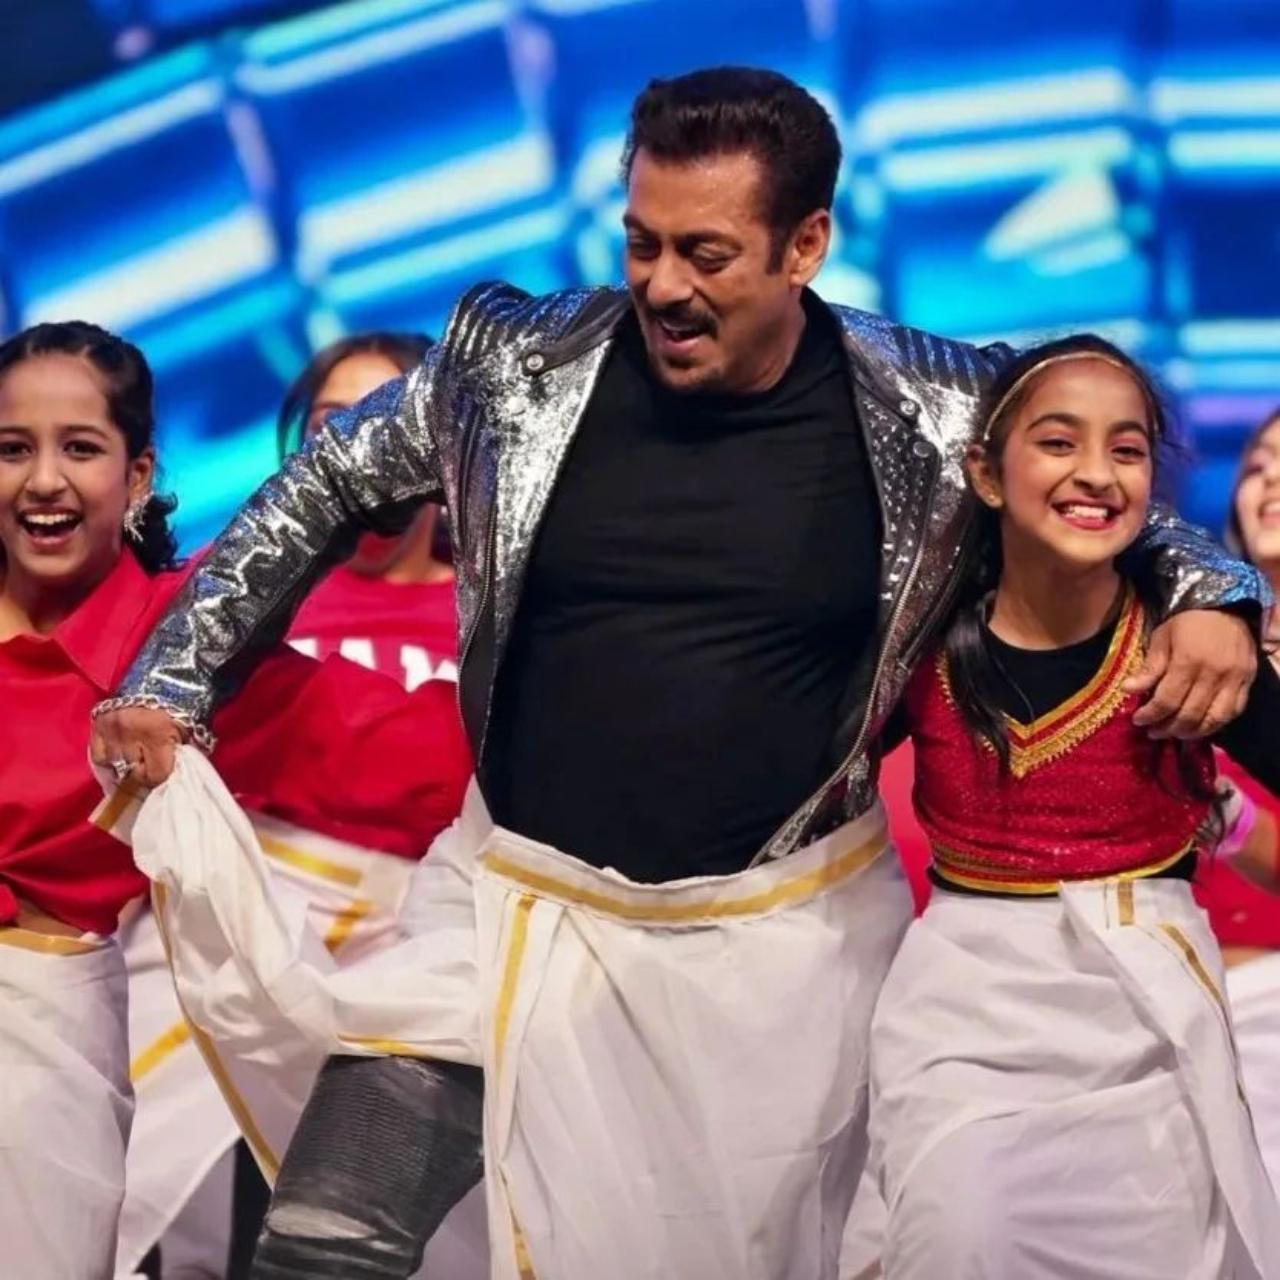 Superstar Salman Khan's performance was one of the highlights of the awards night. The actor dressed in a mundu dance to the song 'Let's dance Chotu motu' from his film 'Kabhi Eid Kabhi Diwali'